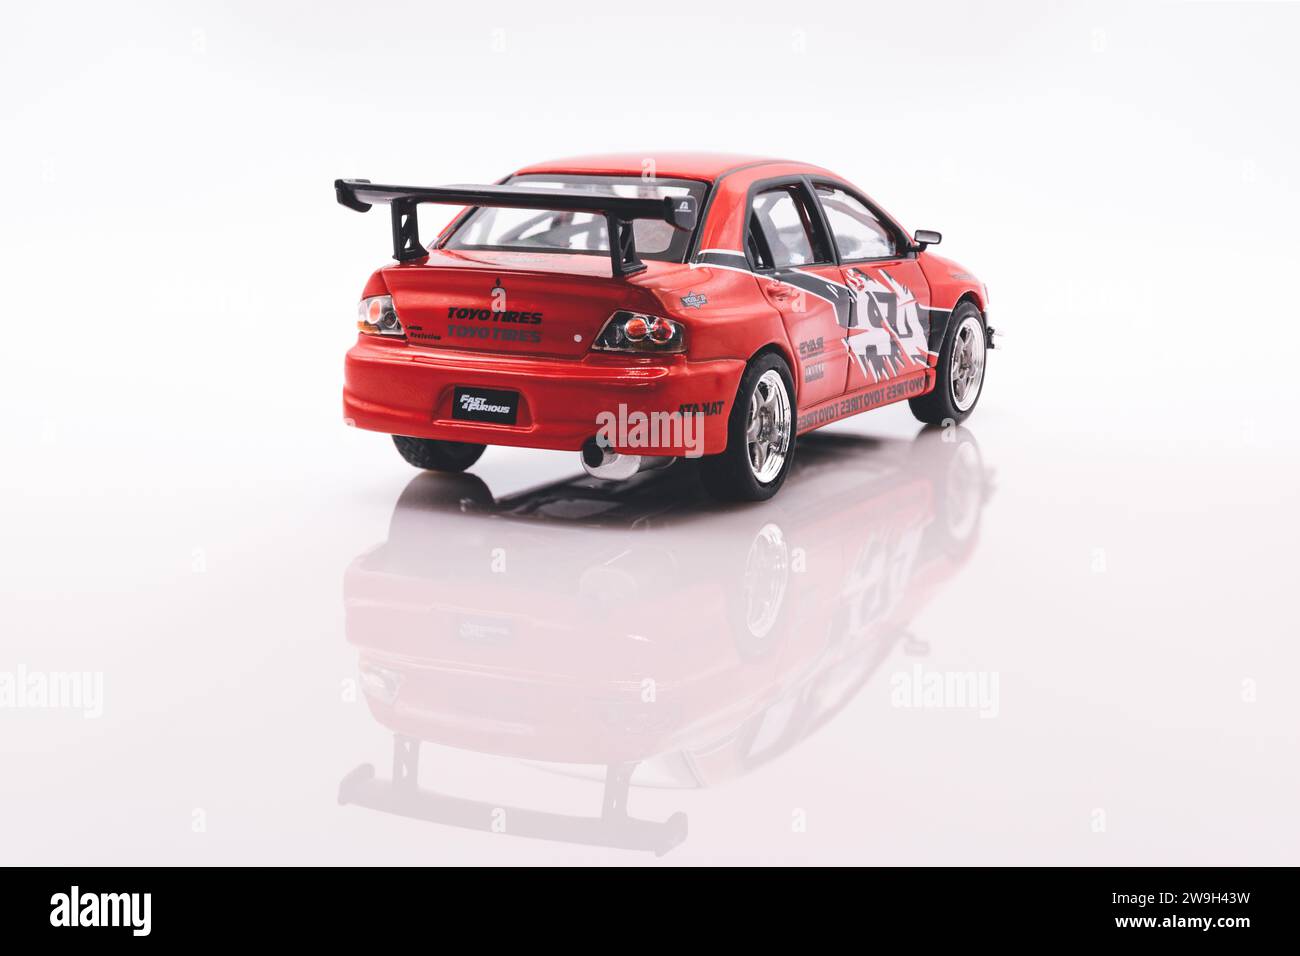 Fast&Furious Mitsubishi Lancer EVO 8 1:43 model car, rear view, white background with reflection Stock Photo